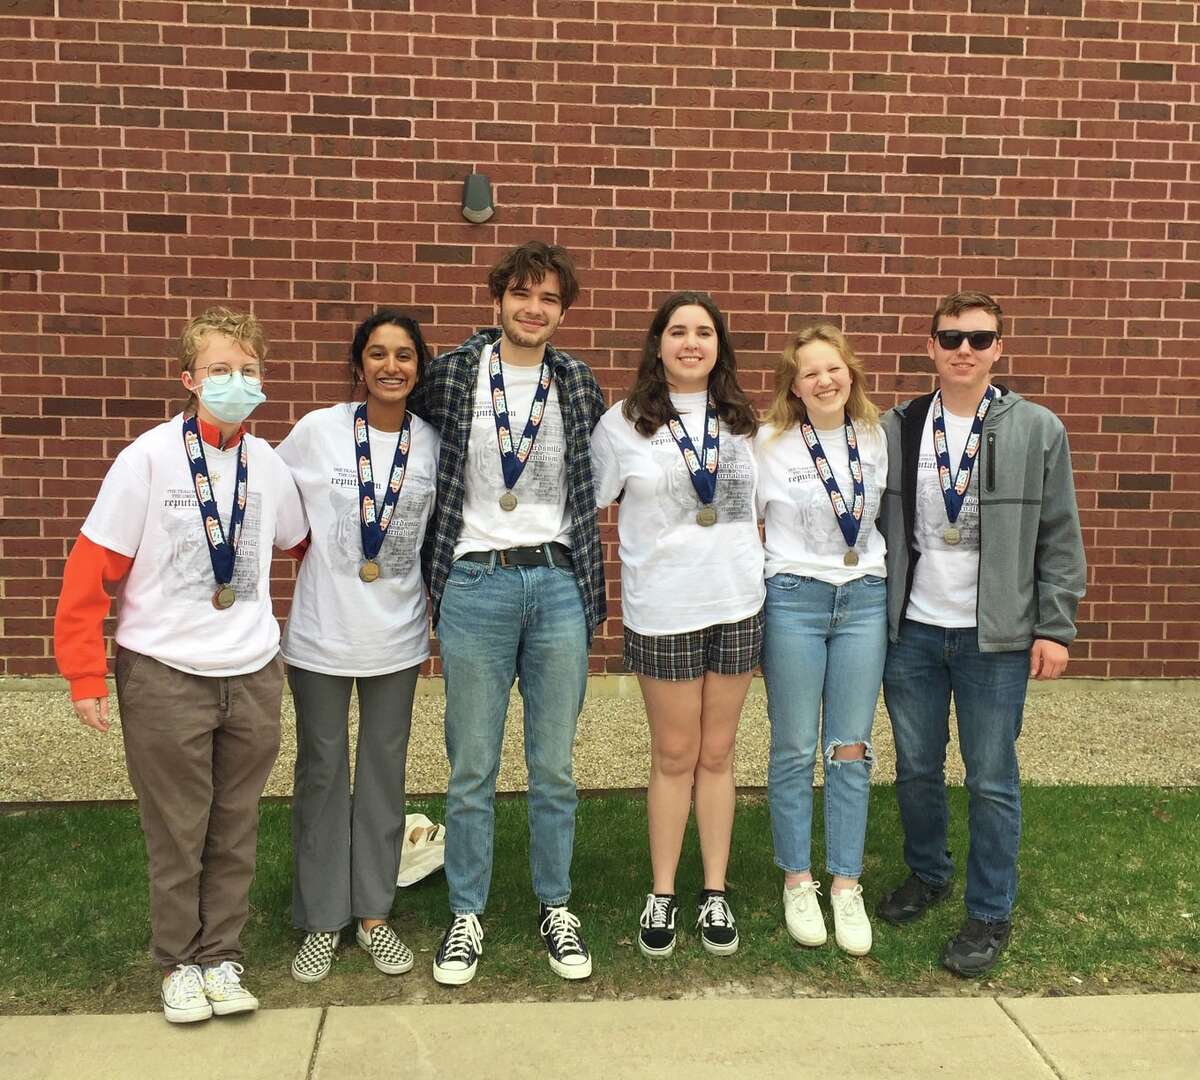 Caspar Dowdy, Veda Kommineni, Simon McKean, Logan Roever, Grace McGinness and Mason Kane of the EHS Journailsm team won state runner-up at the IHSA Jouralism State competition.